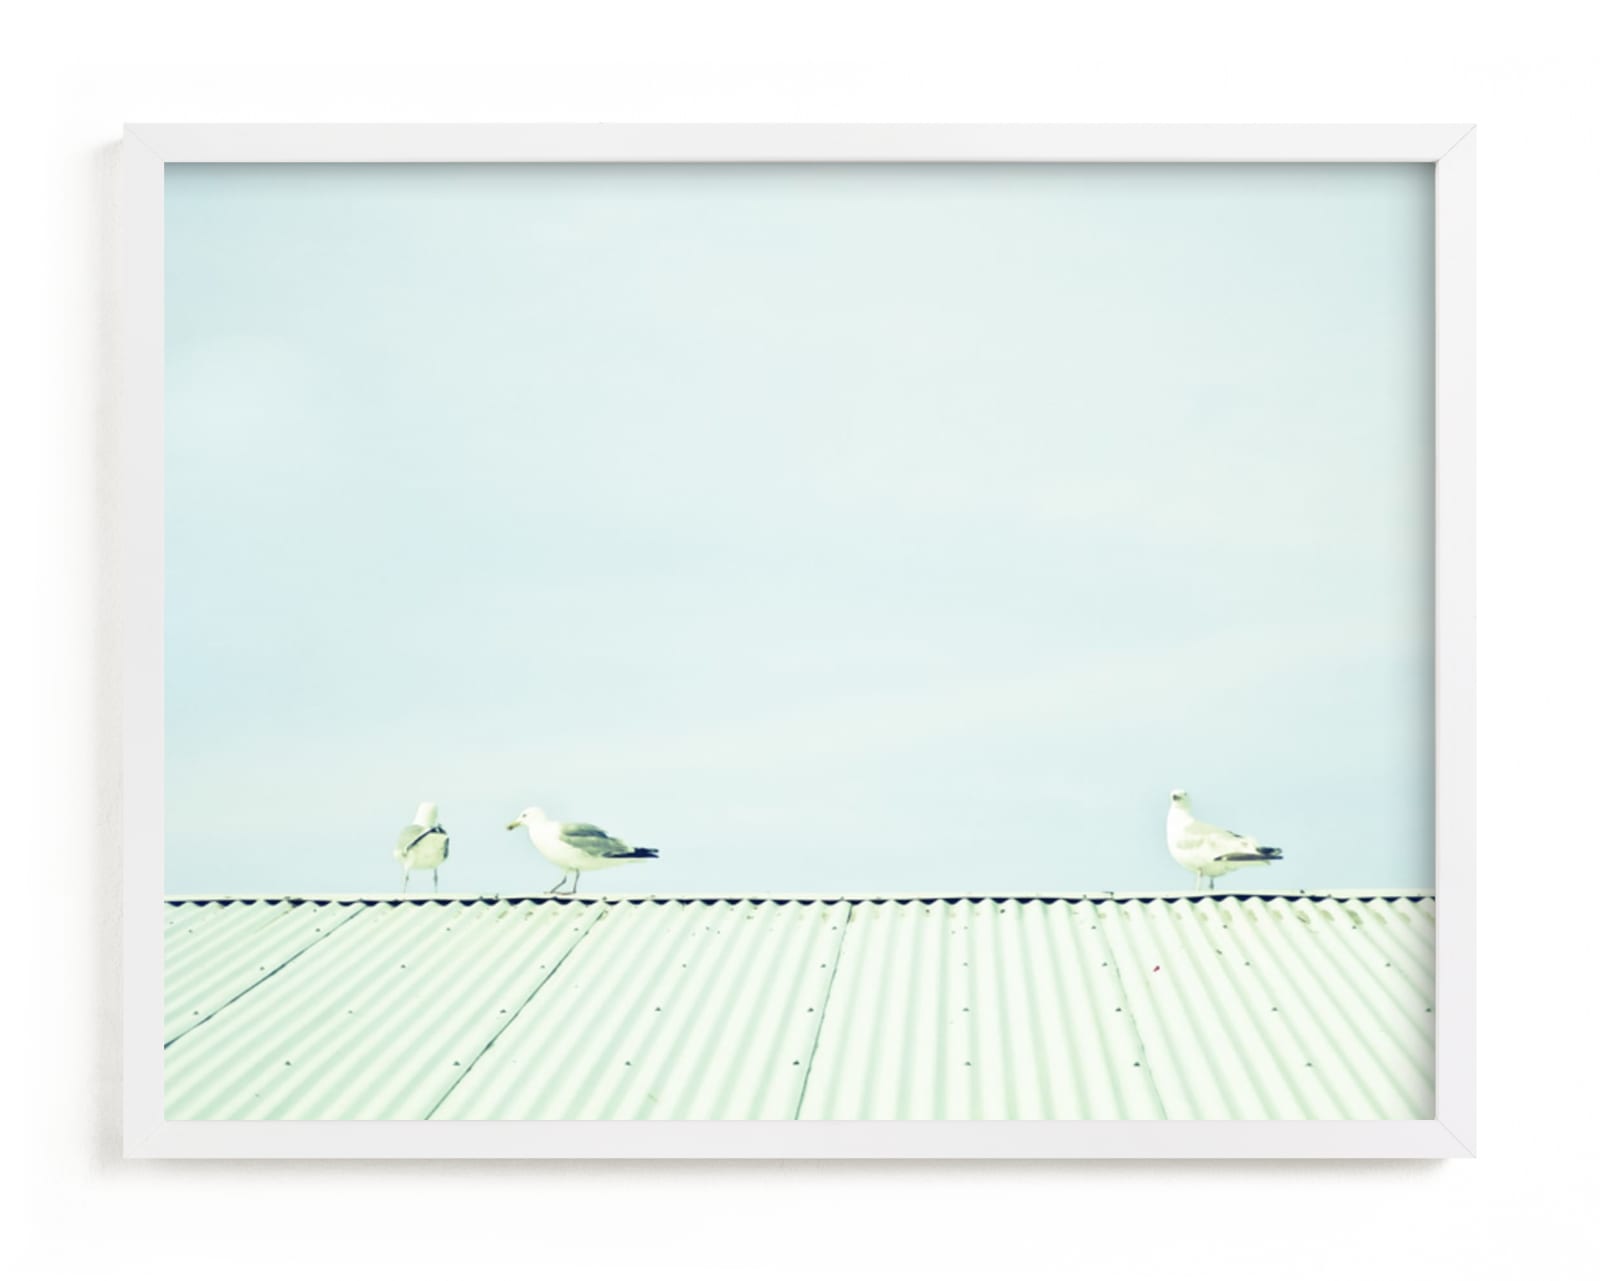 This is a blue art by Alexandra Feo called Seagulls On The Roof.